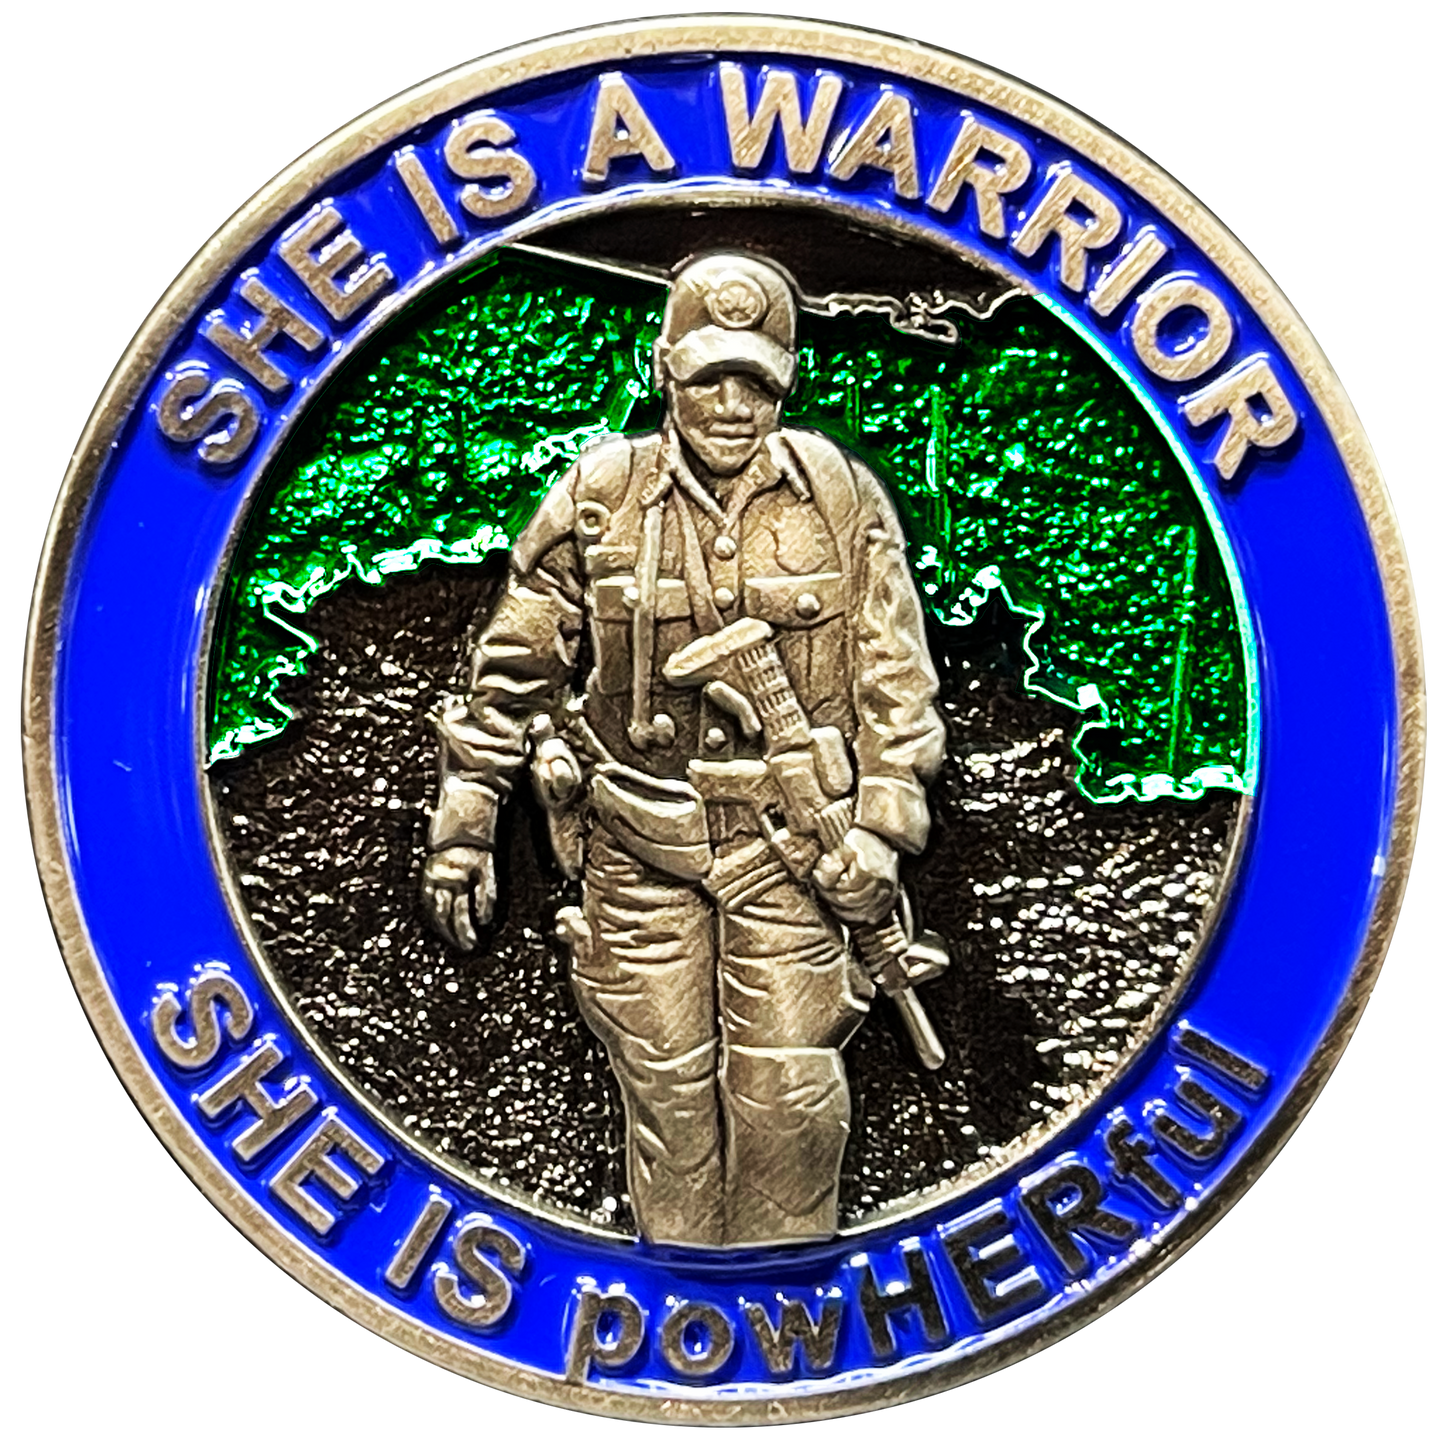 BL6-006 She is a powHERful Warrior thin blue line Police Border Patrol CBP Military Tactical Female Challenge Coin Agent Officer CBP ATF LAPD Deputy Sheriff